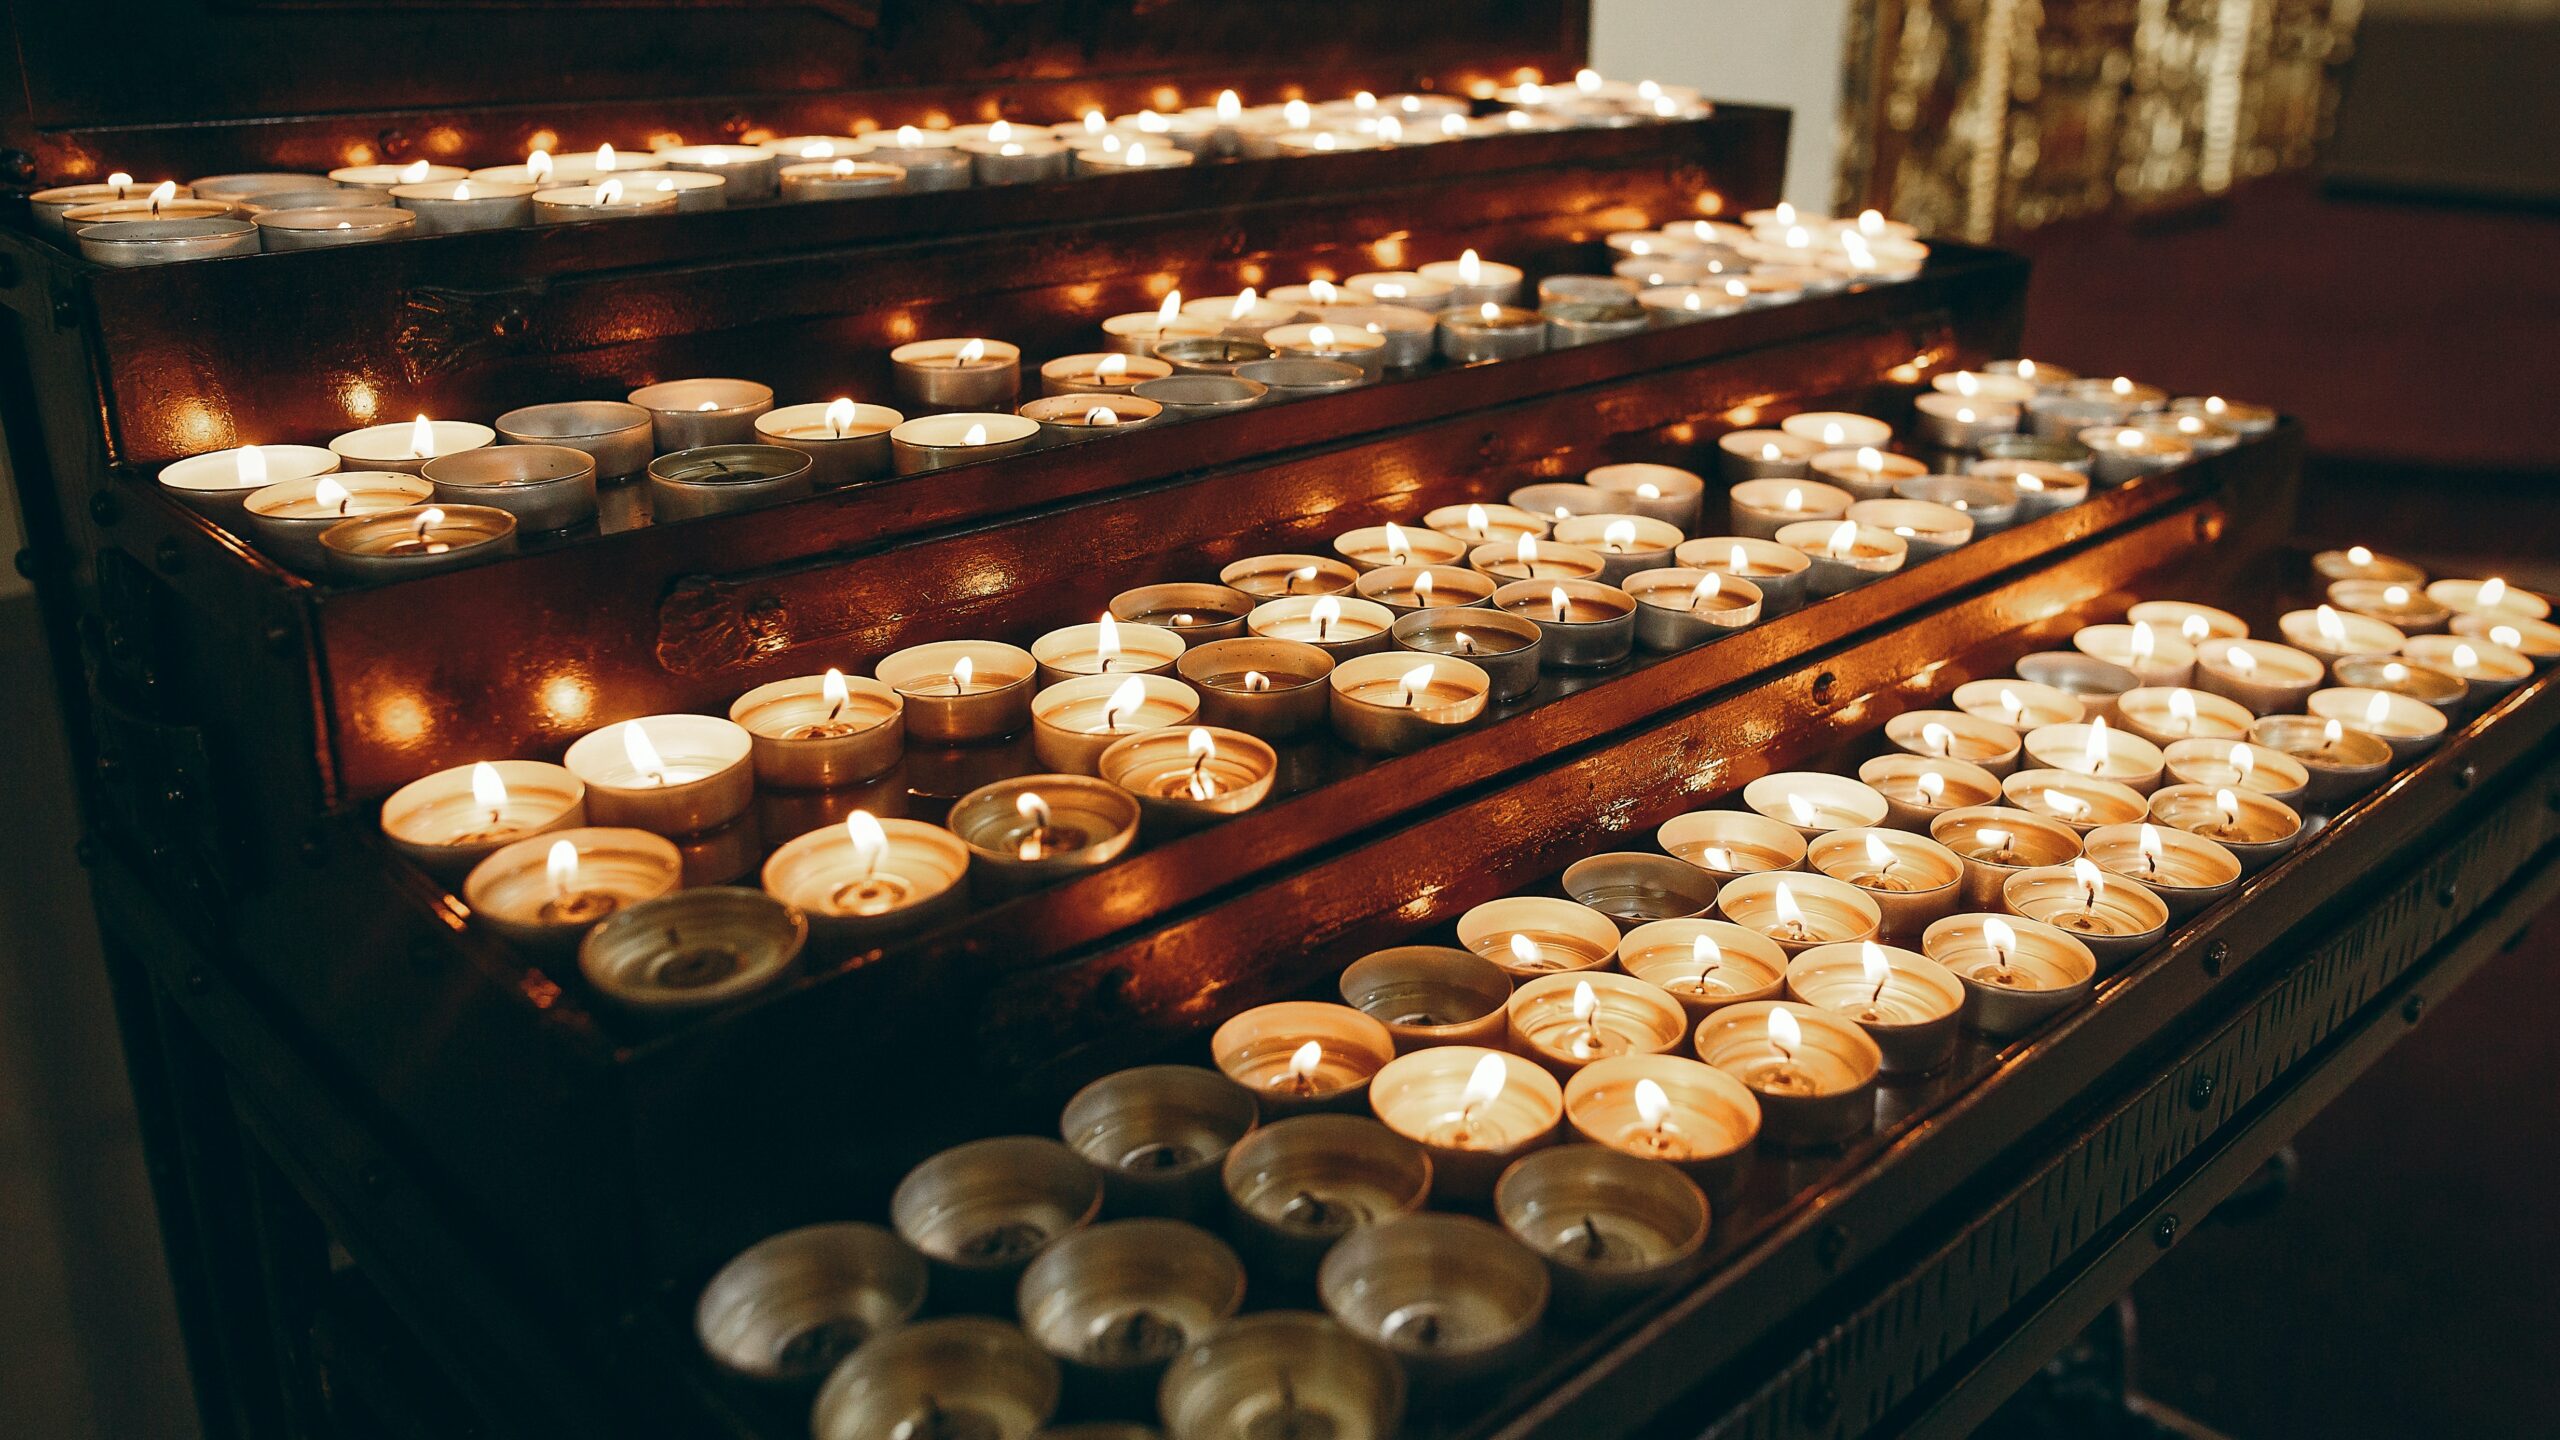 candles lit in a church